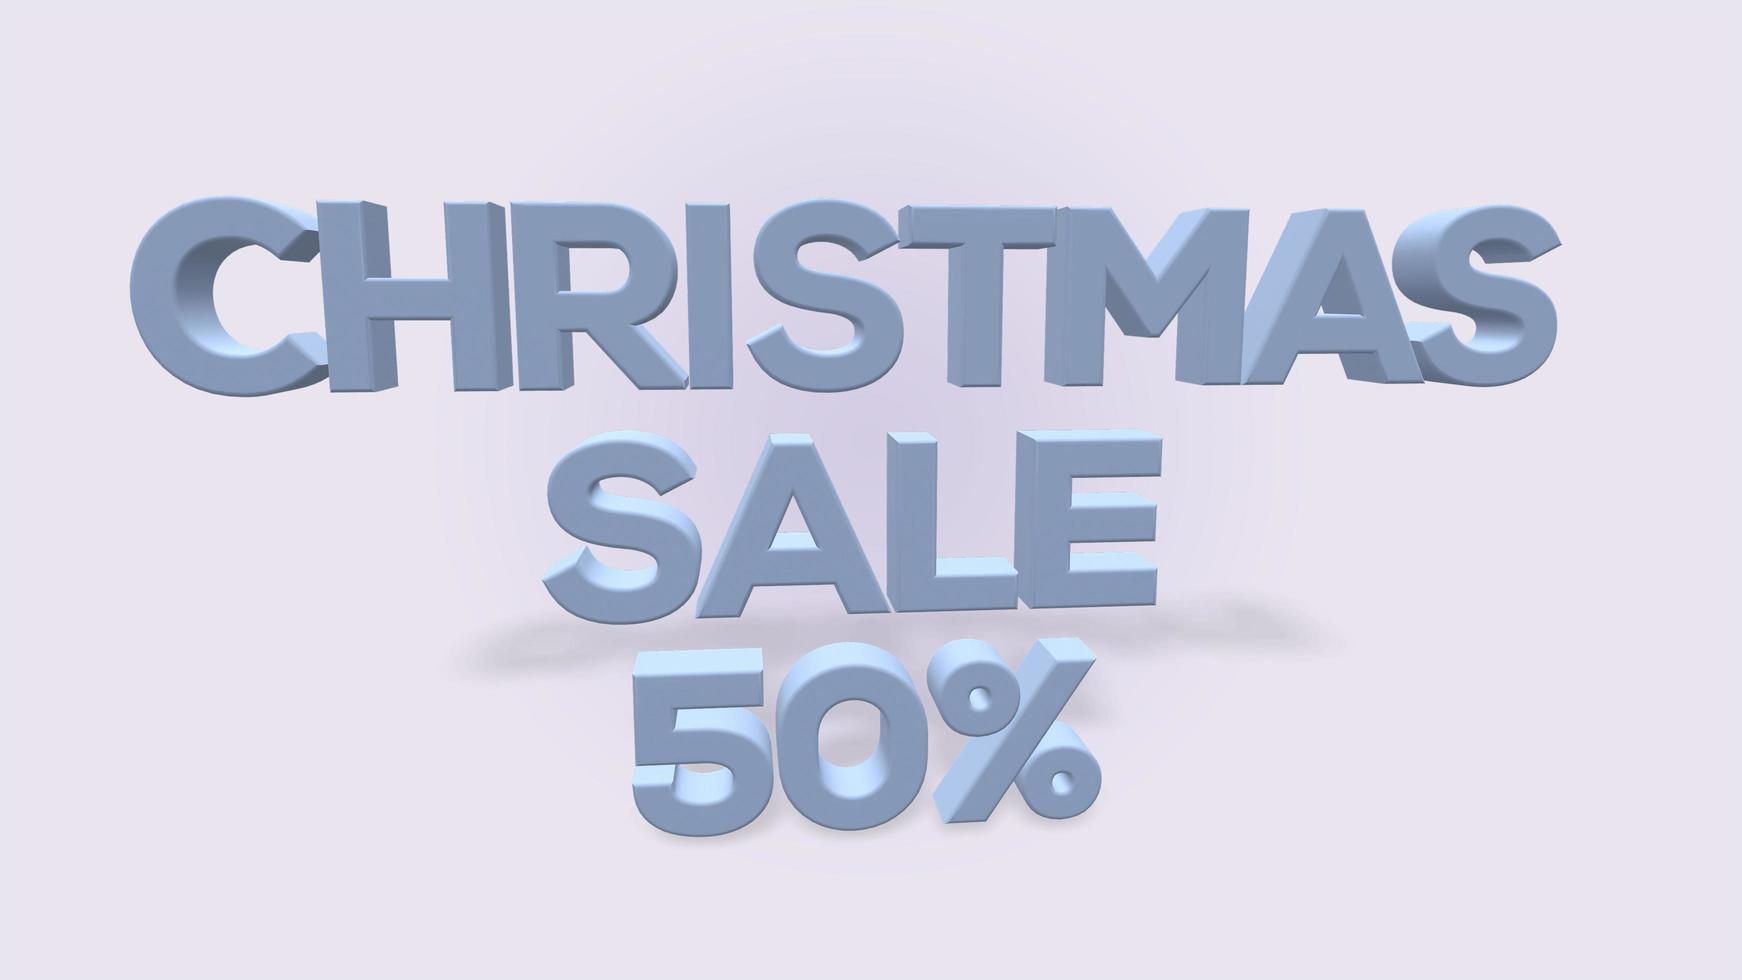 3d render of Christmas sale 50 percent discount illustration on white background photo